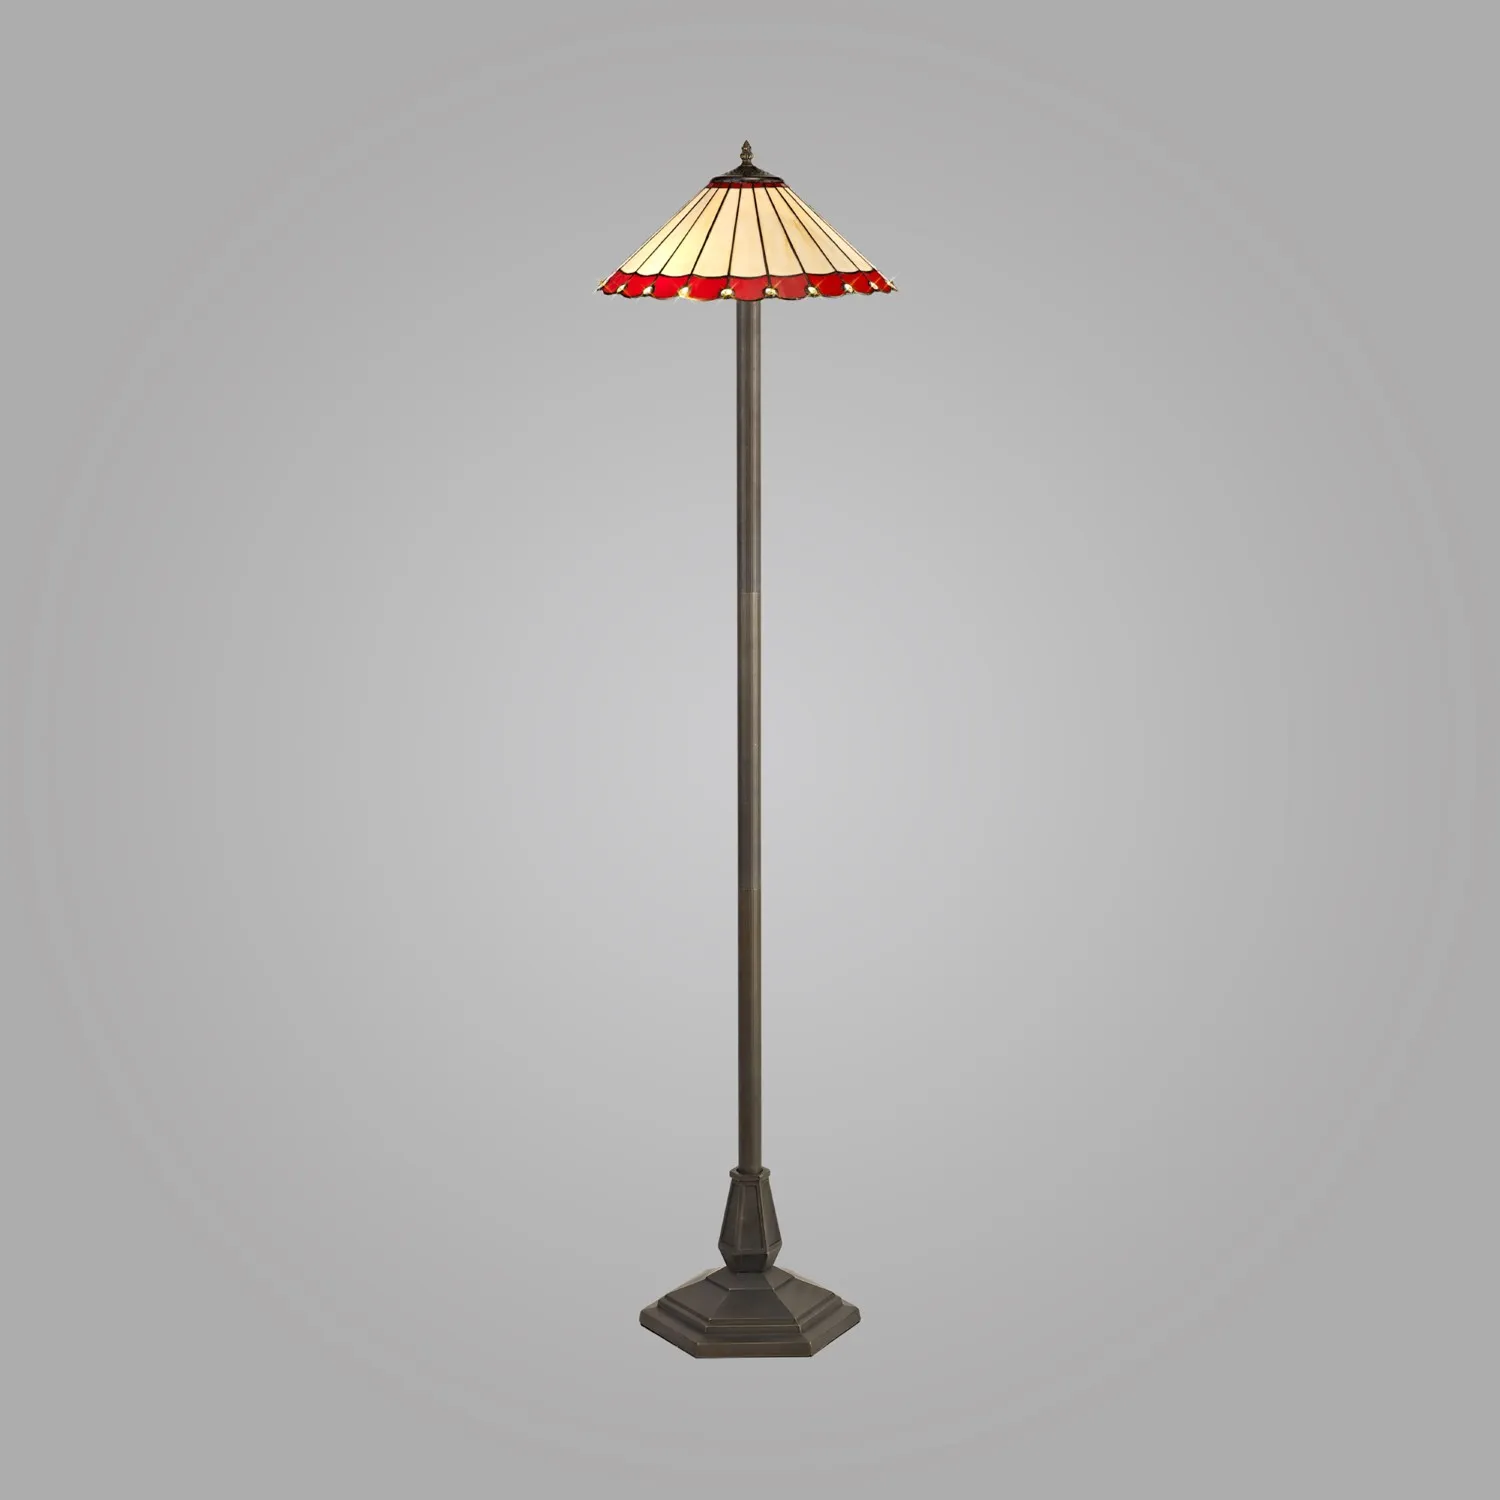 Ware 2 Light Octagonal Floor Lamp E27 With 40cm Tiffany Shade, Red Cream Crystal Aged Antique Brass